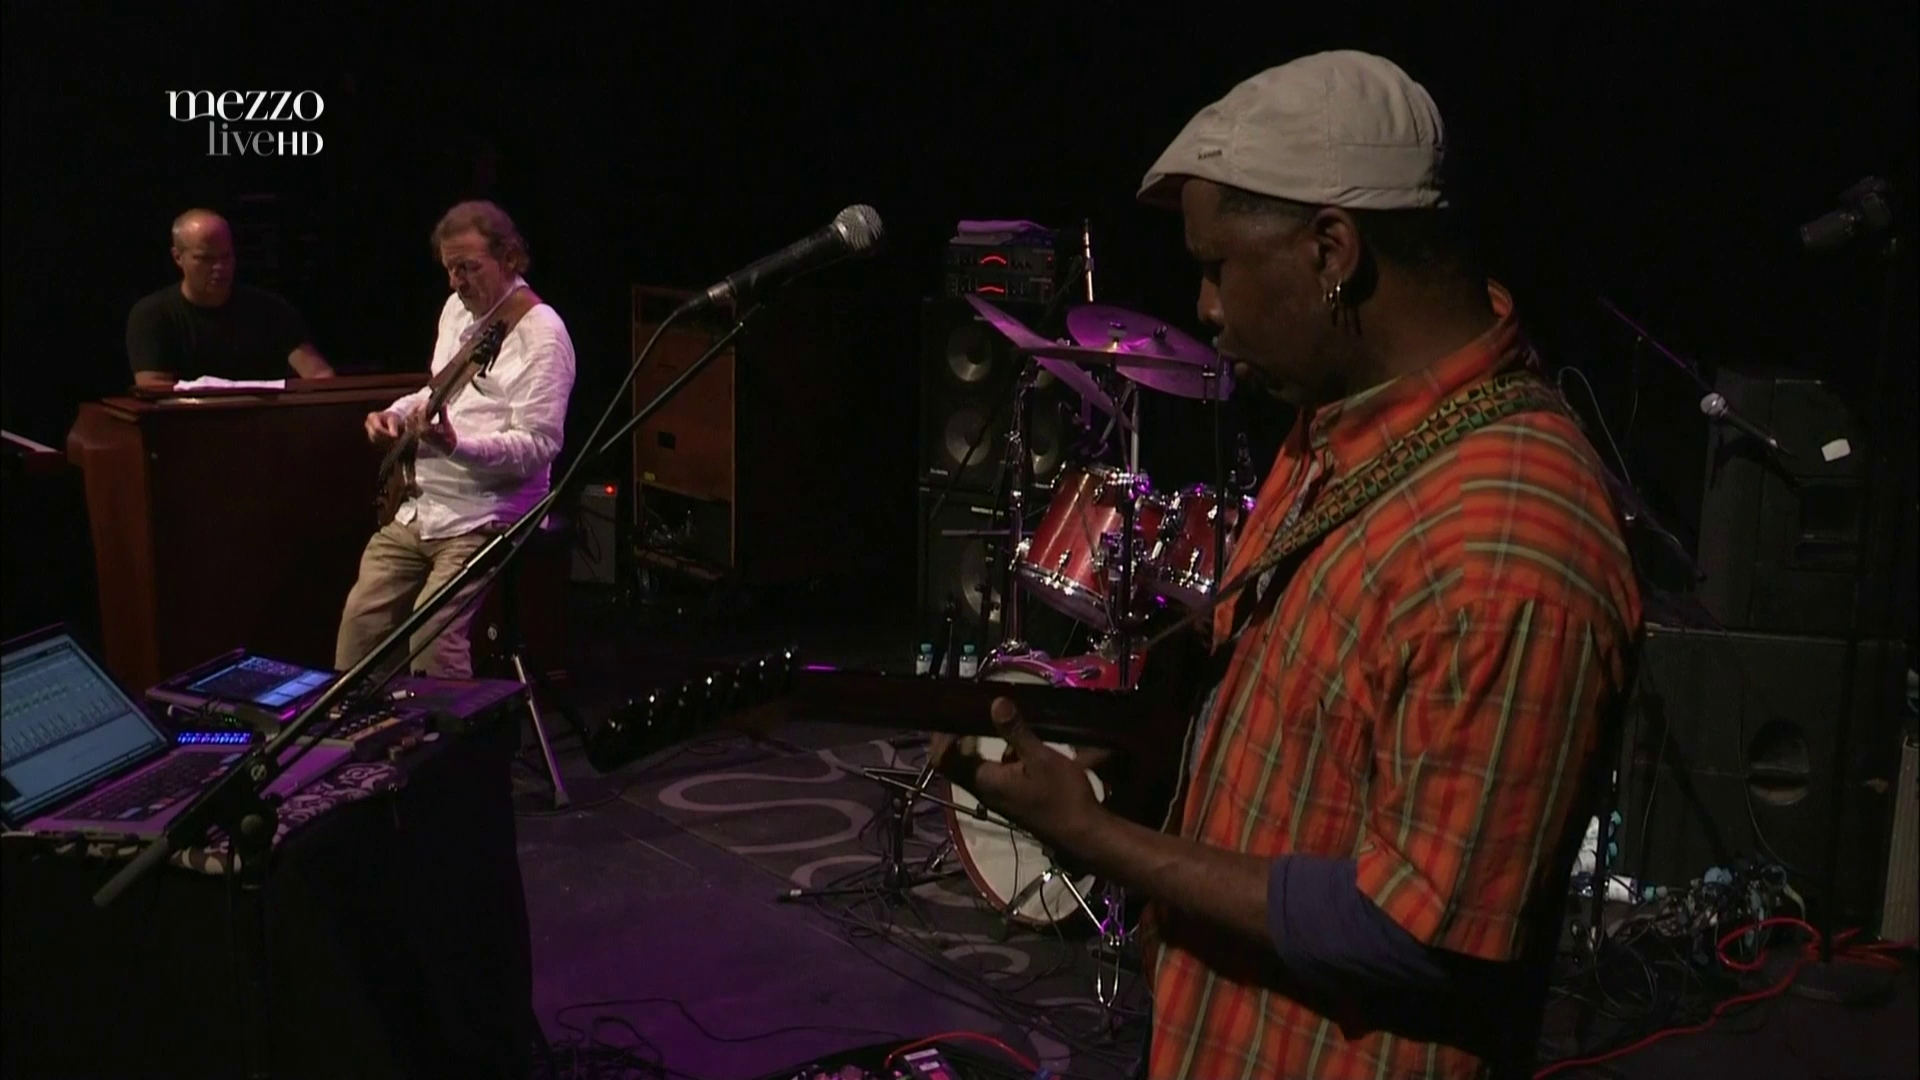 2012 Spectrum Road - Live at Porgy and Bess Vienna [HDTV 1080p] 1